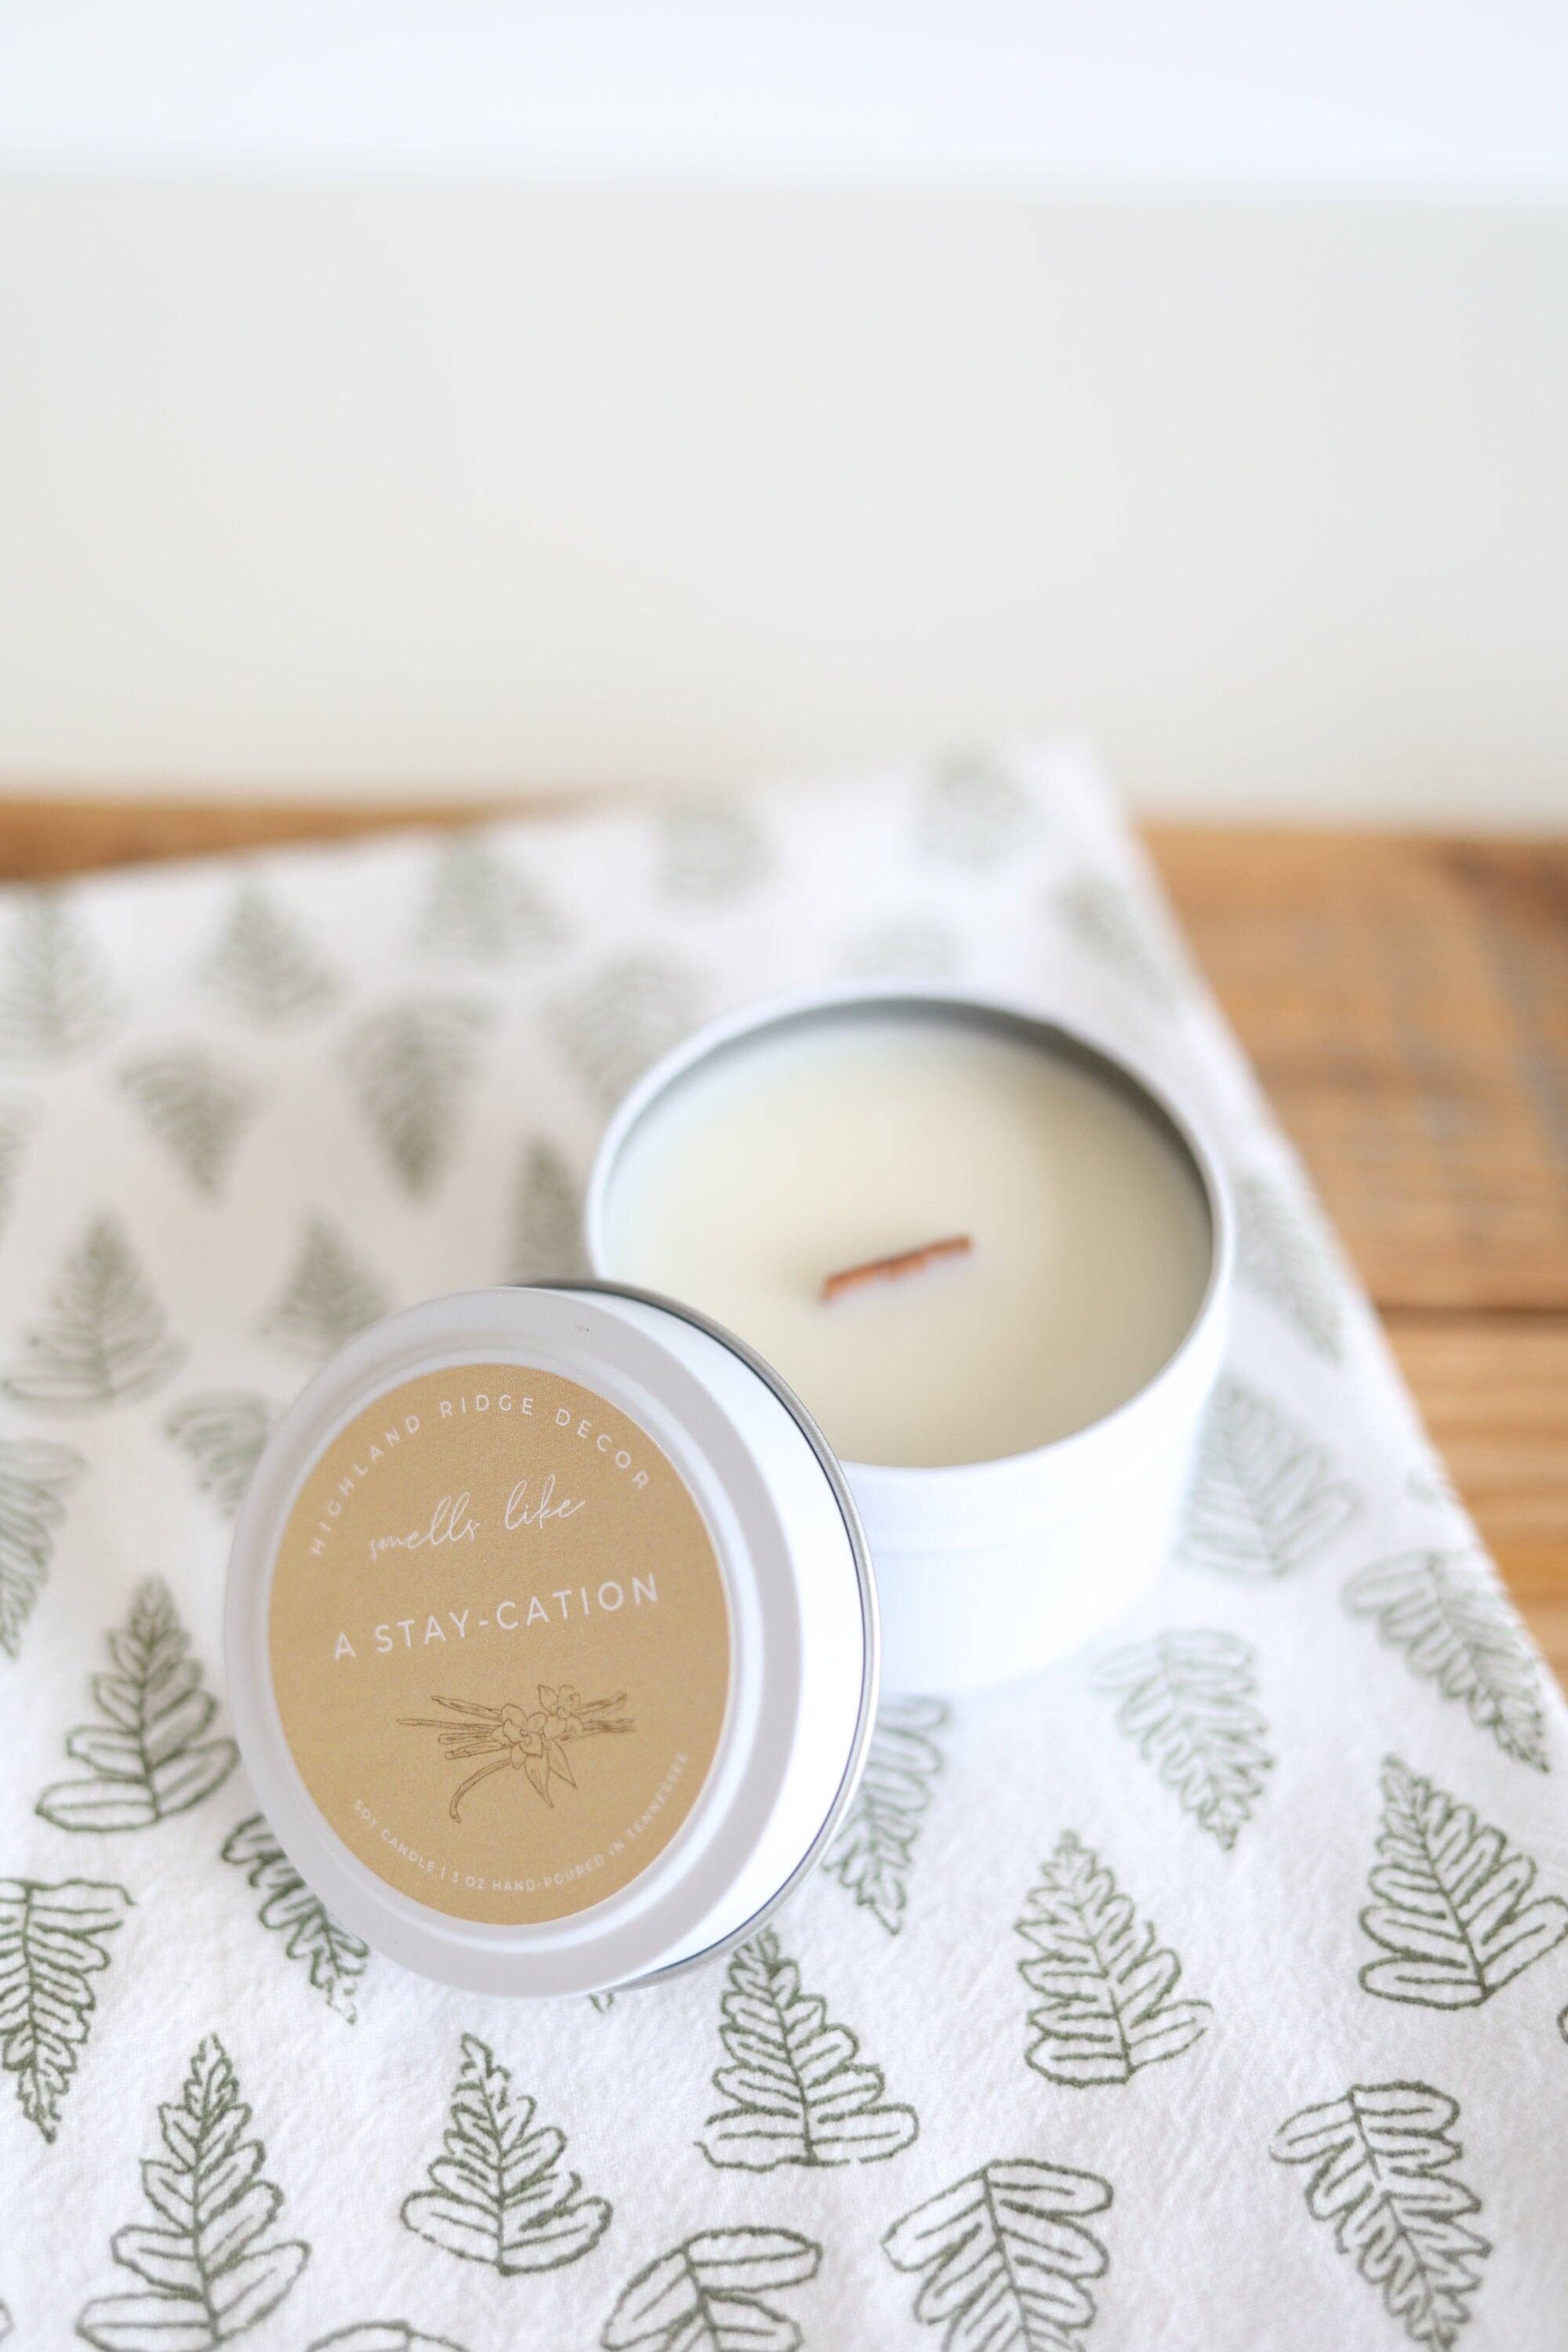 "A Stay-cation" Candle Tin